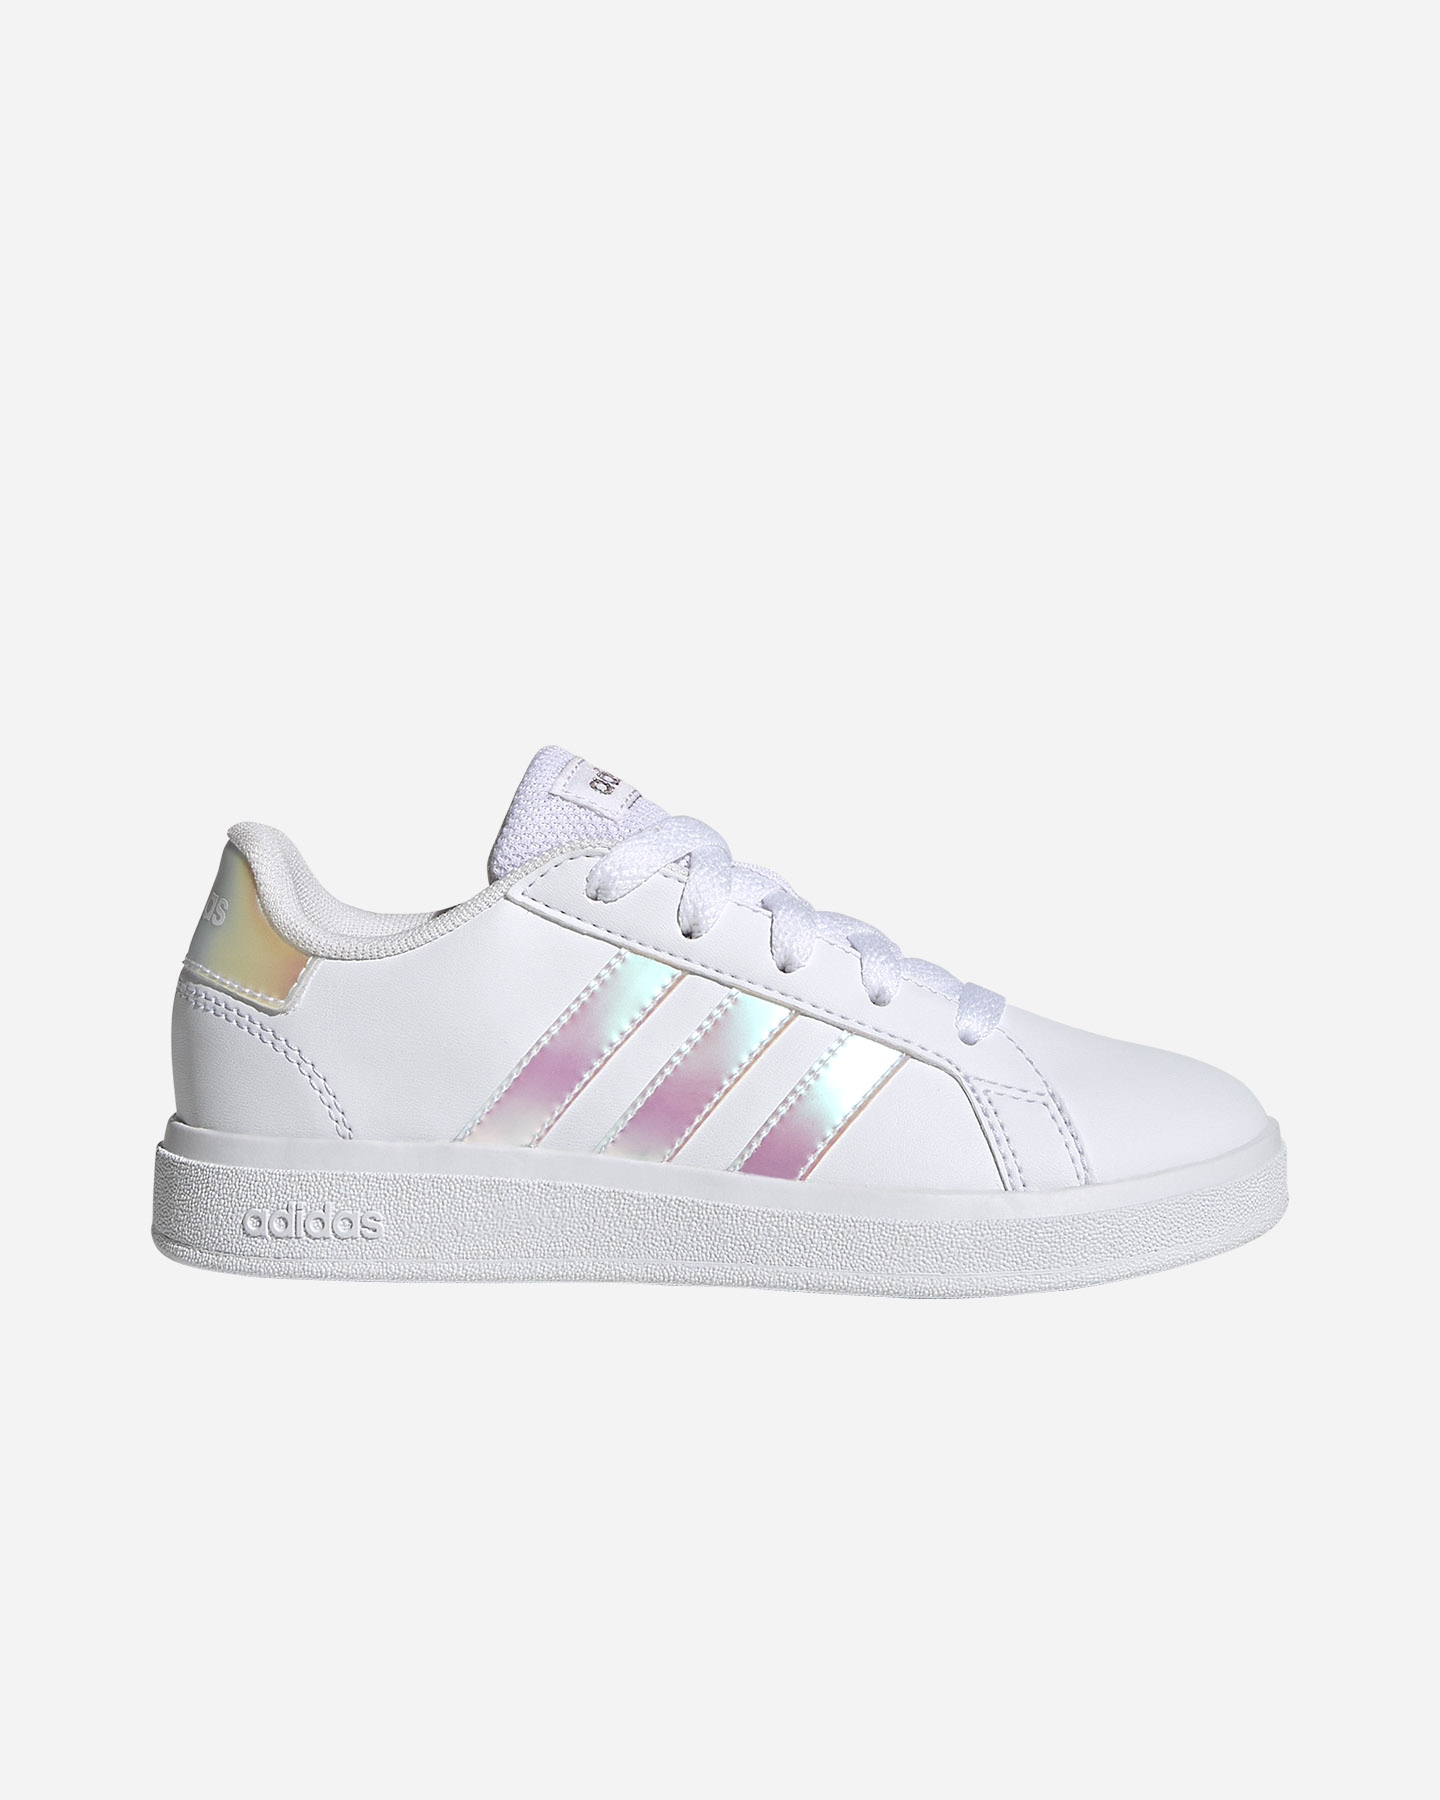 Image of Adidas Grand Court 2.0 Gs Jr - Scarpe Sneakers